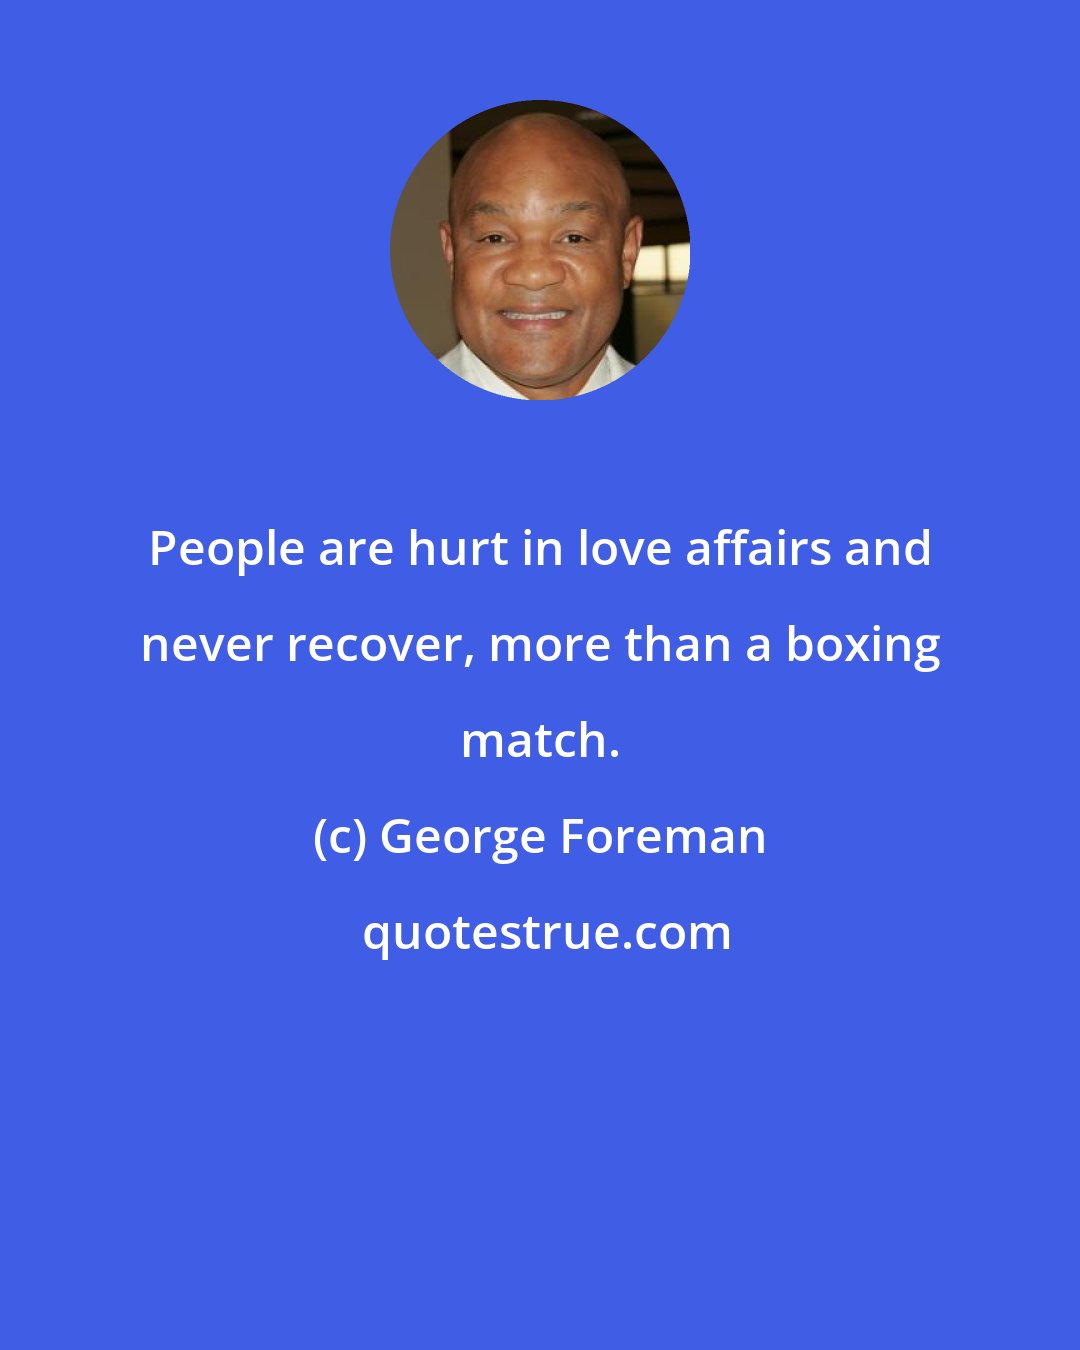 George Foreman: People are hurt in love affairs and never recover, more than a boxing match.